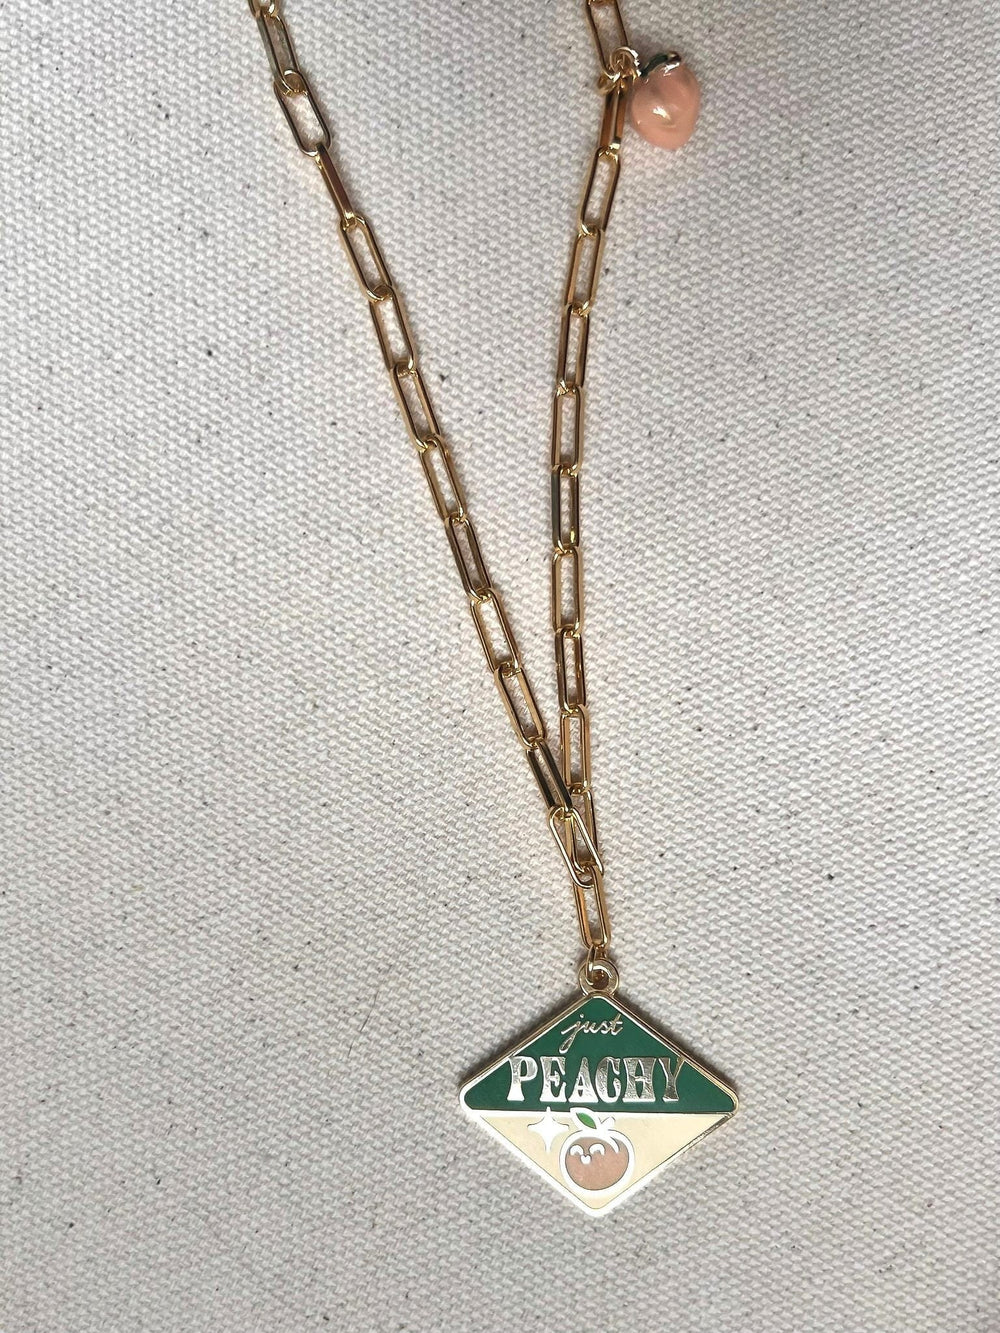 Just Peachy Necklace Necklaces Style 1 - Medium paperclip chain: 60cm (ca.24”) Necklace